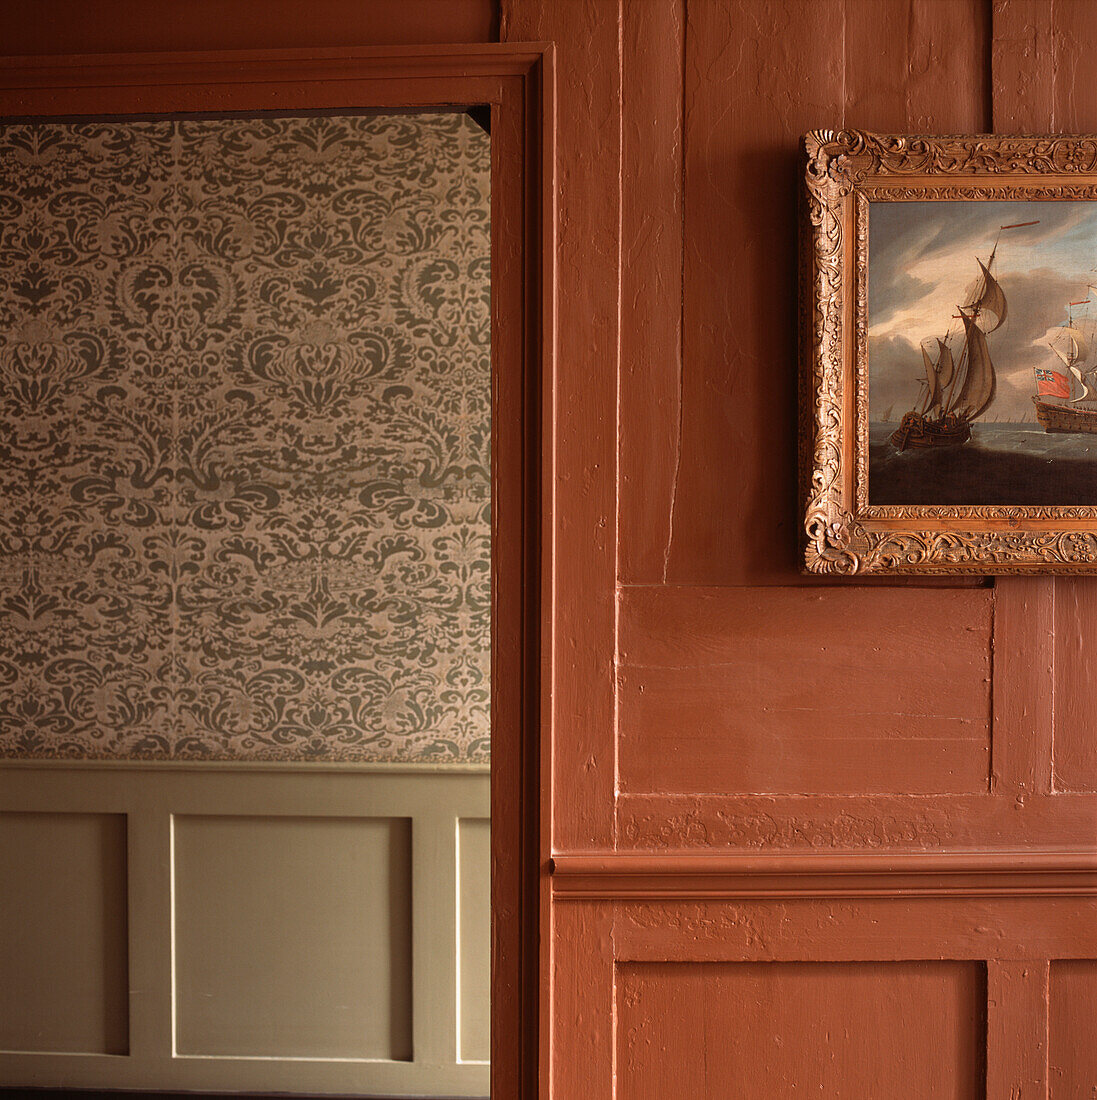 View of decorative wallpaper from the doorway of a panelled room in a restored Huguenot Spitalfields house